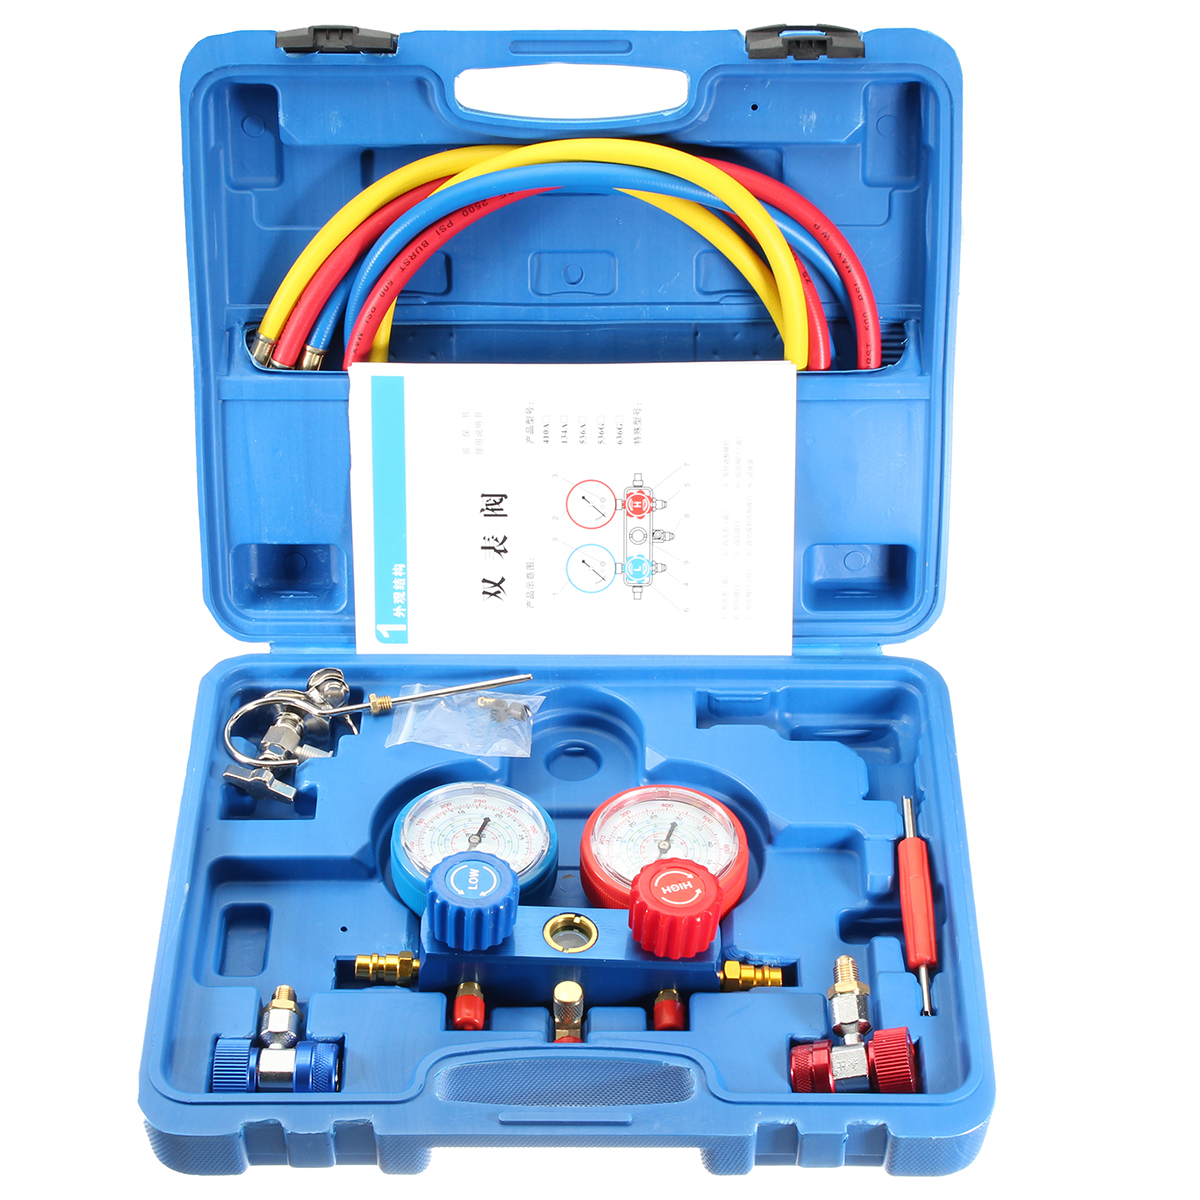 0-500PSI-Air-Conditioning-Refrigerant-Fluorine-Table-Gauge-Diagnostic-Test-Tool-1188878